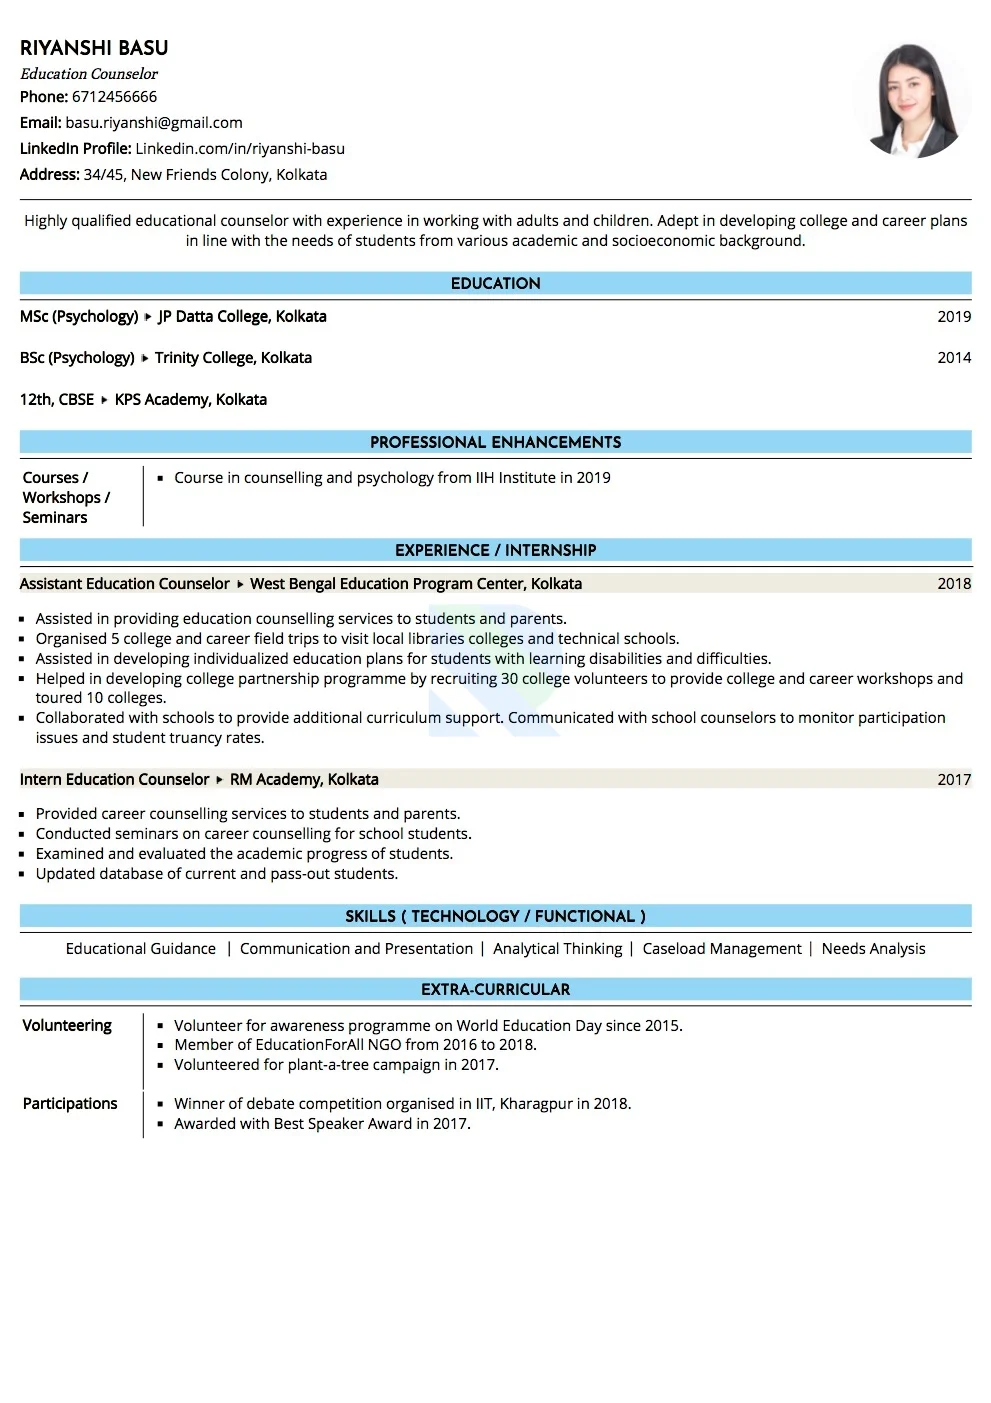 Sample Resume of Education Counselor  | Free Resume Templates & Samples on Resumod.co